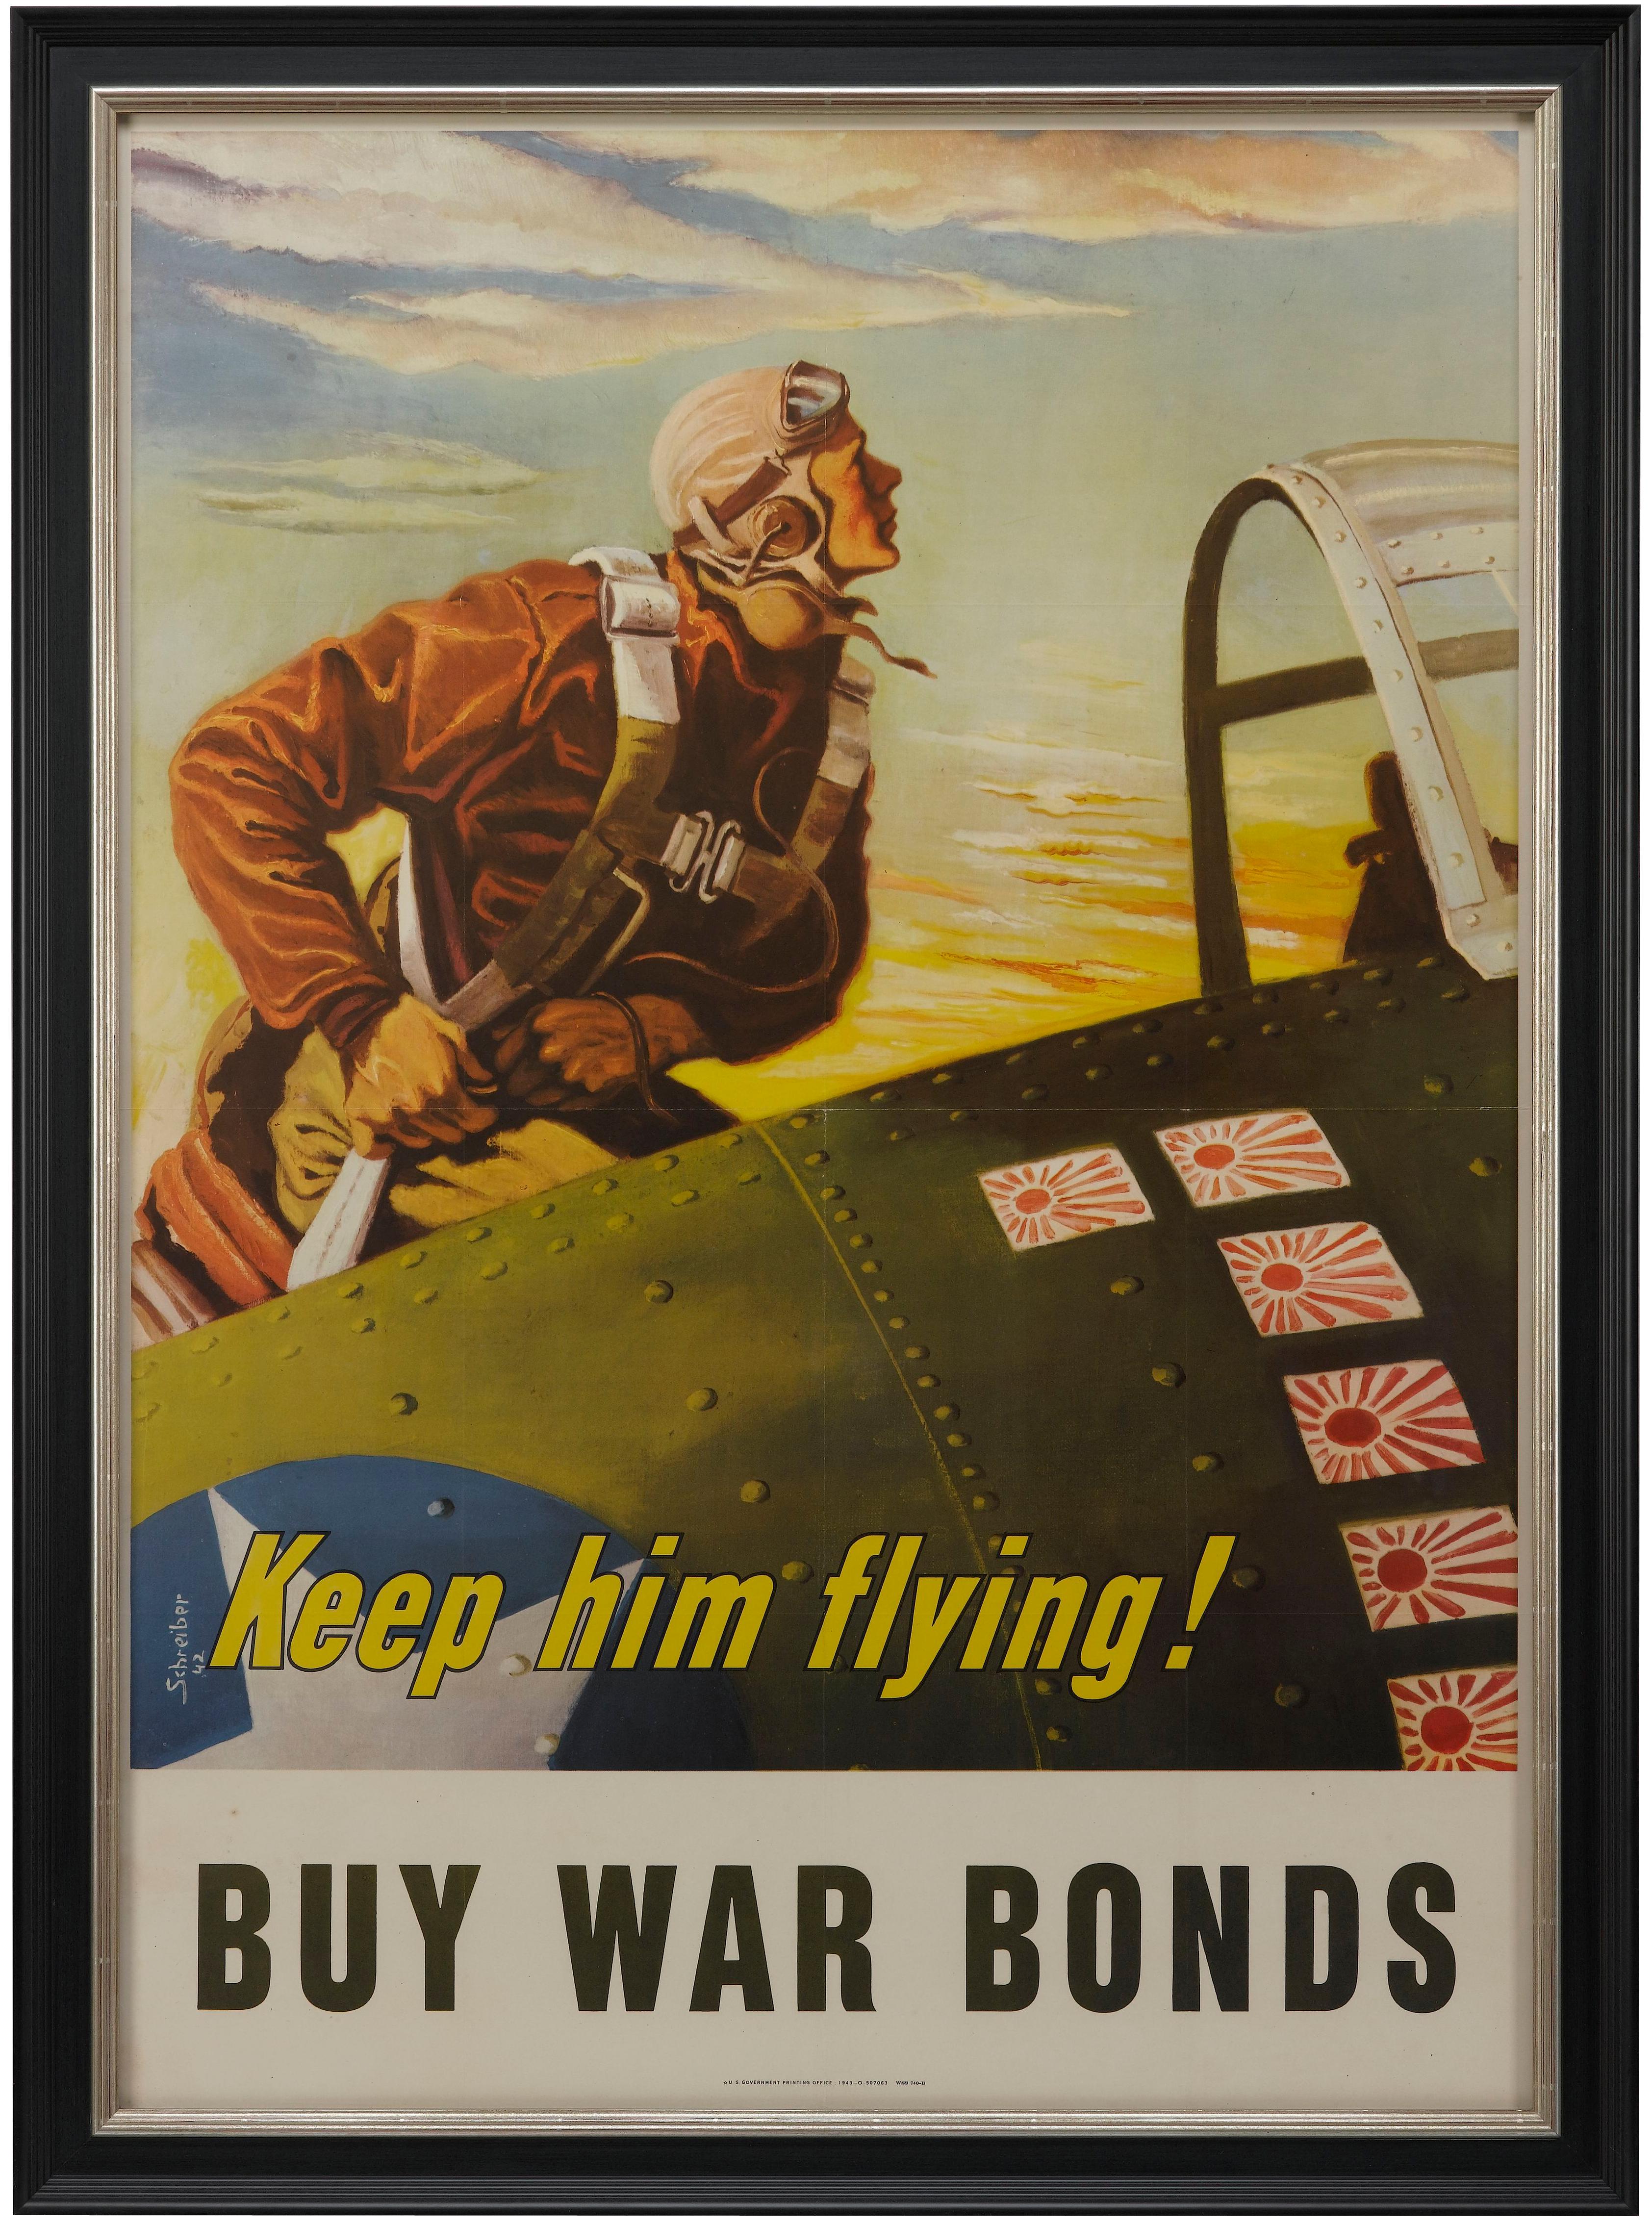 what is the motivation behind the “buy the new victory bonds” poster